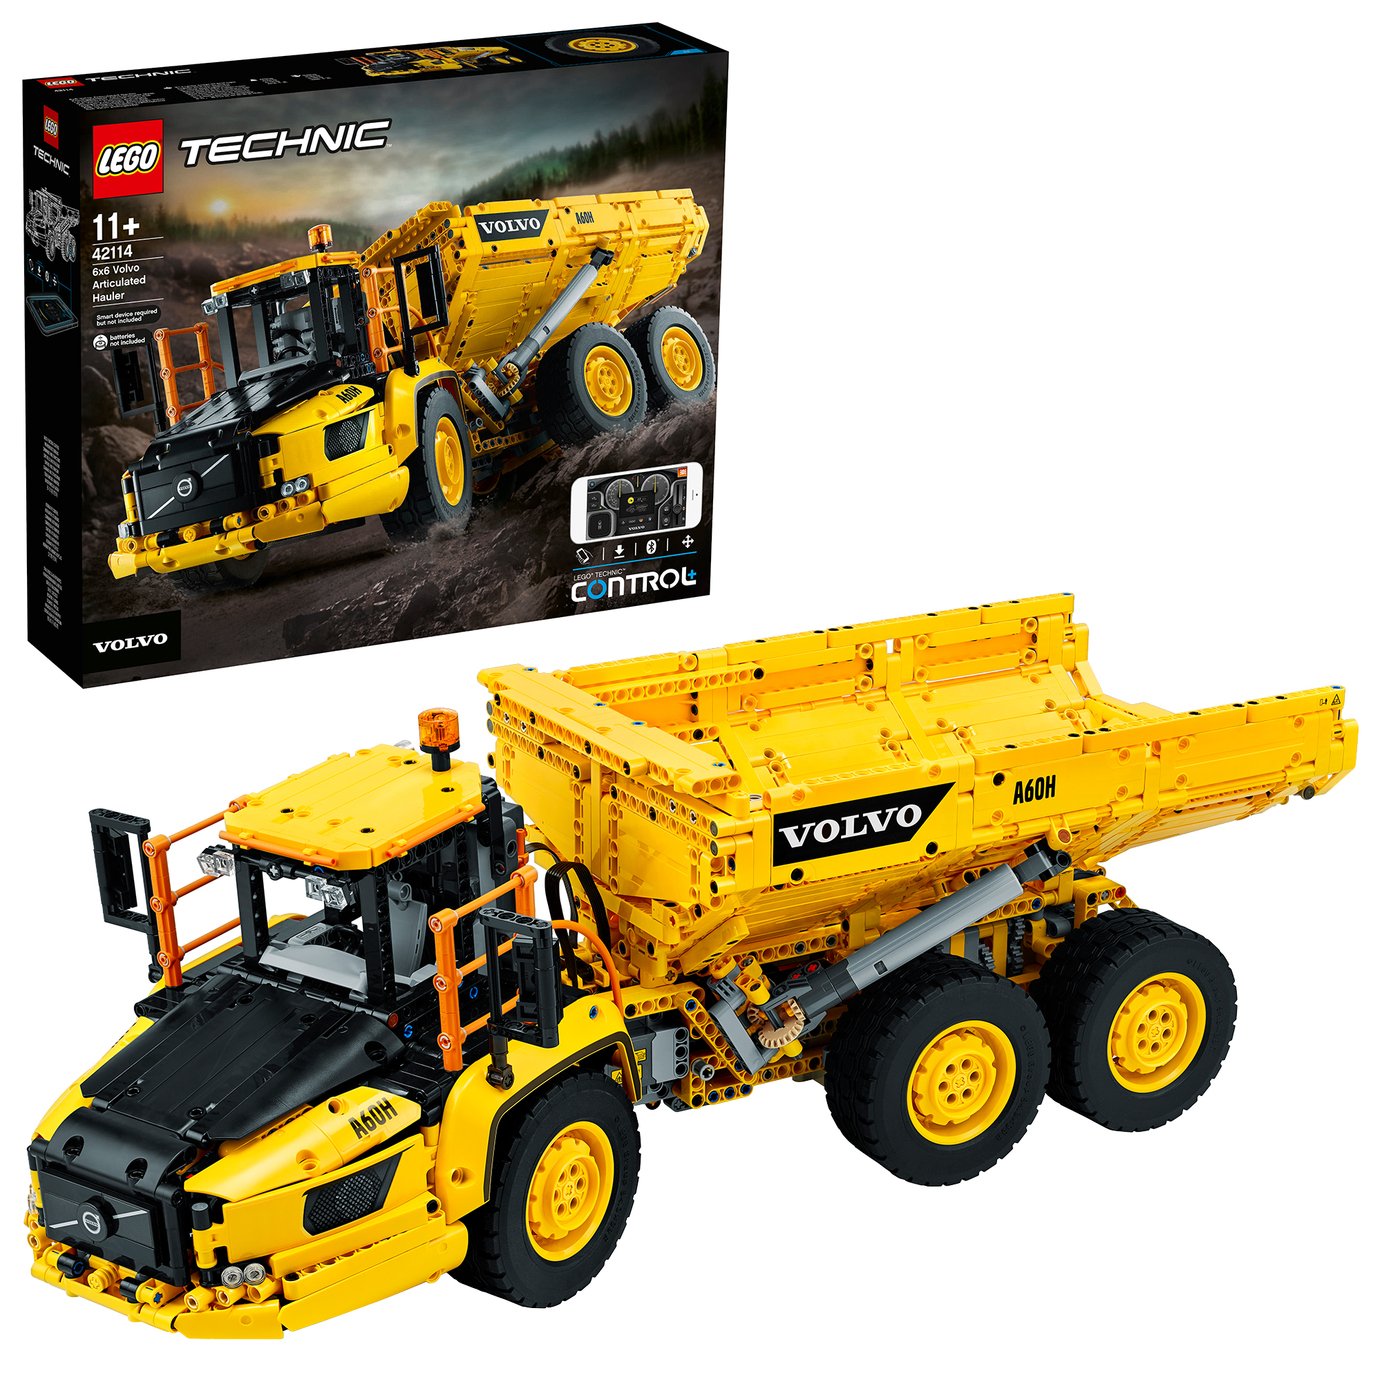 LEGO Technic 6x6 Volvo Articulated Hauler RC Truck 42114 Review